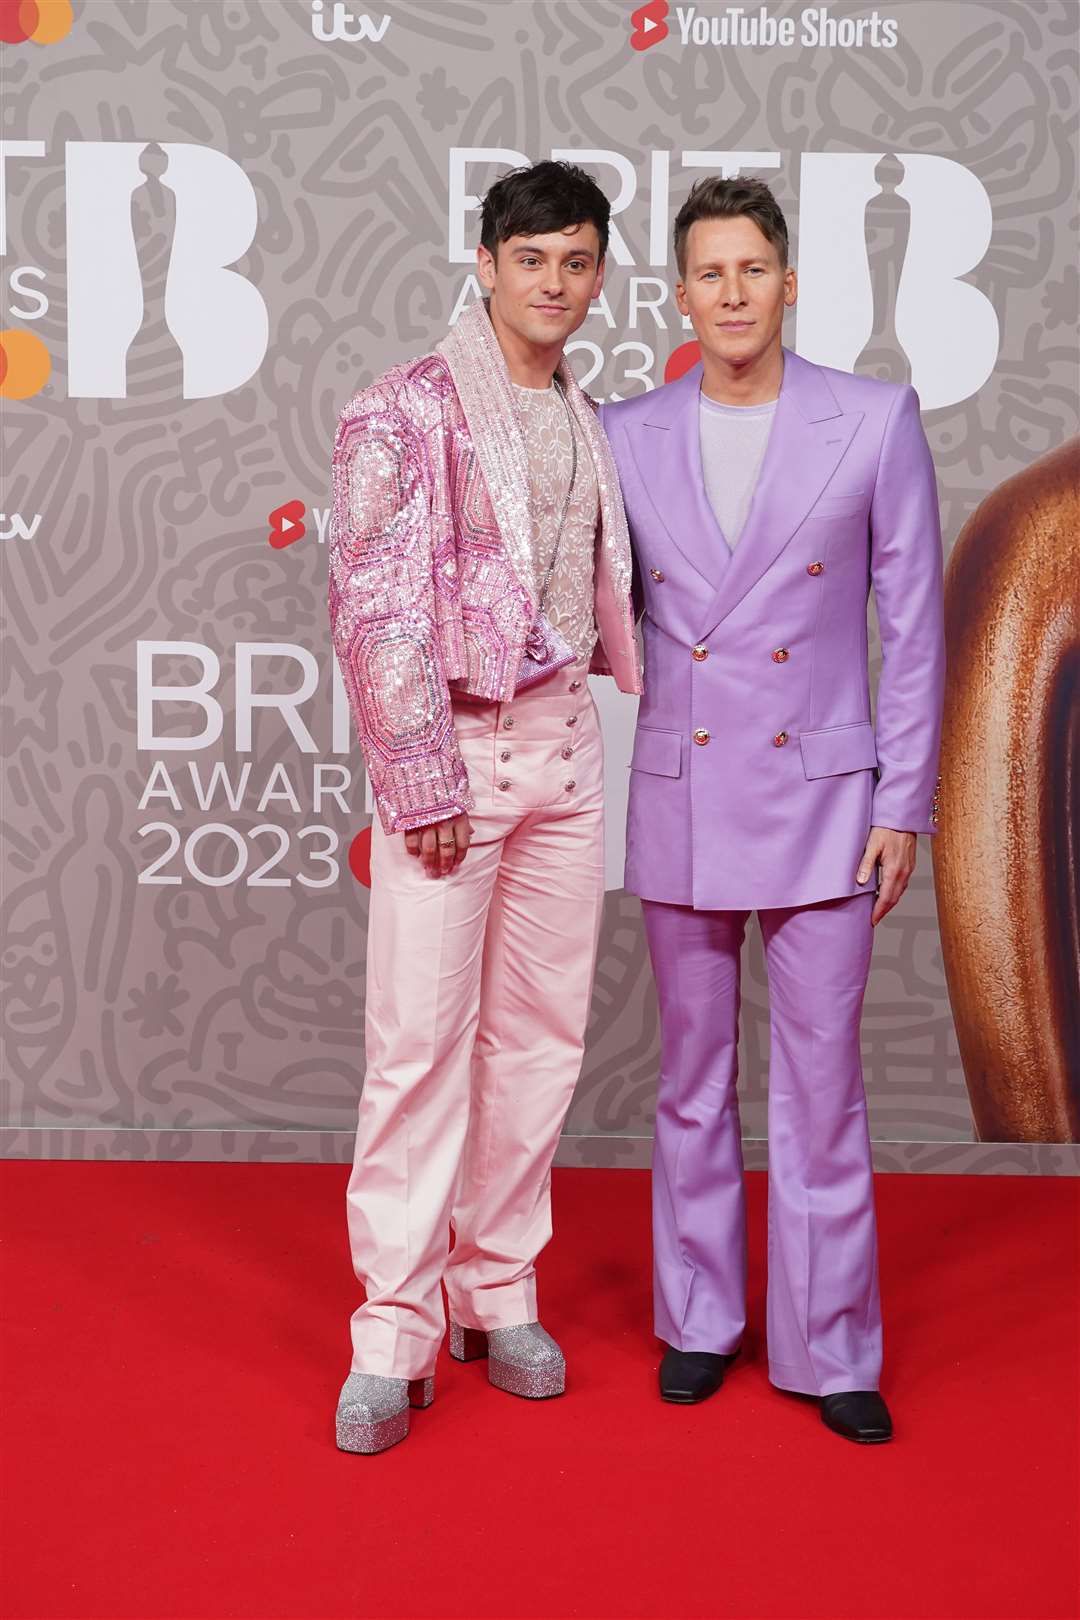 Tom Daley and Dustin Lance Black attending the Brit Awards 2023 at the O2 Arena in London (Ian West/PA)